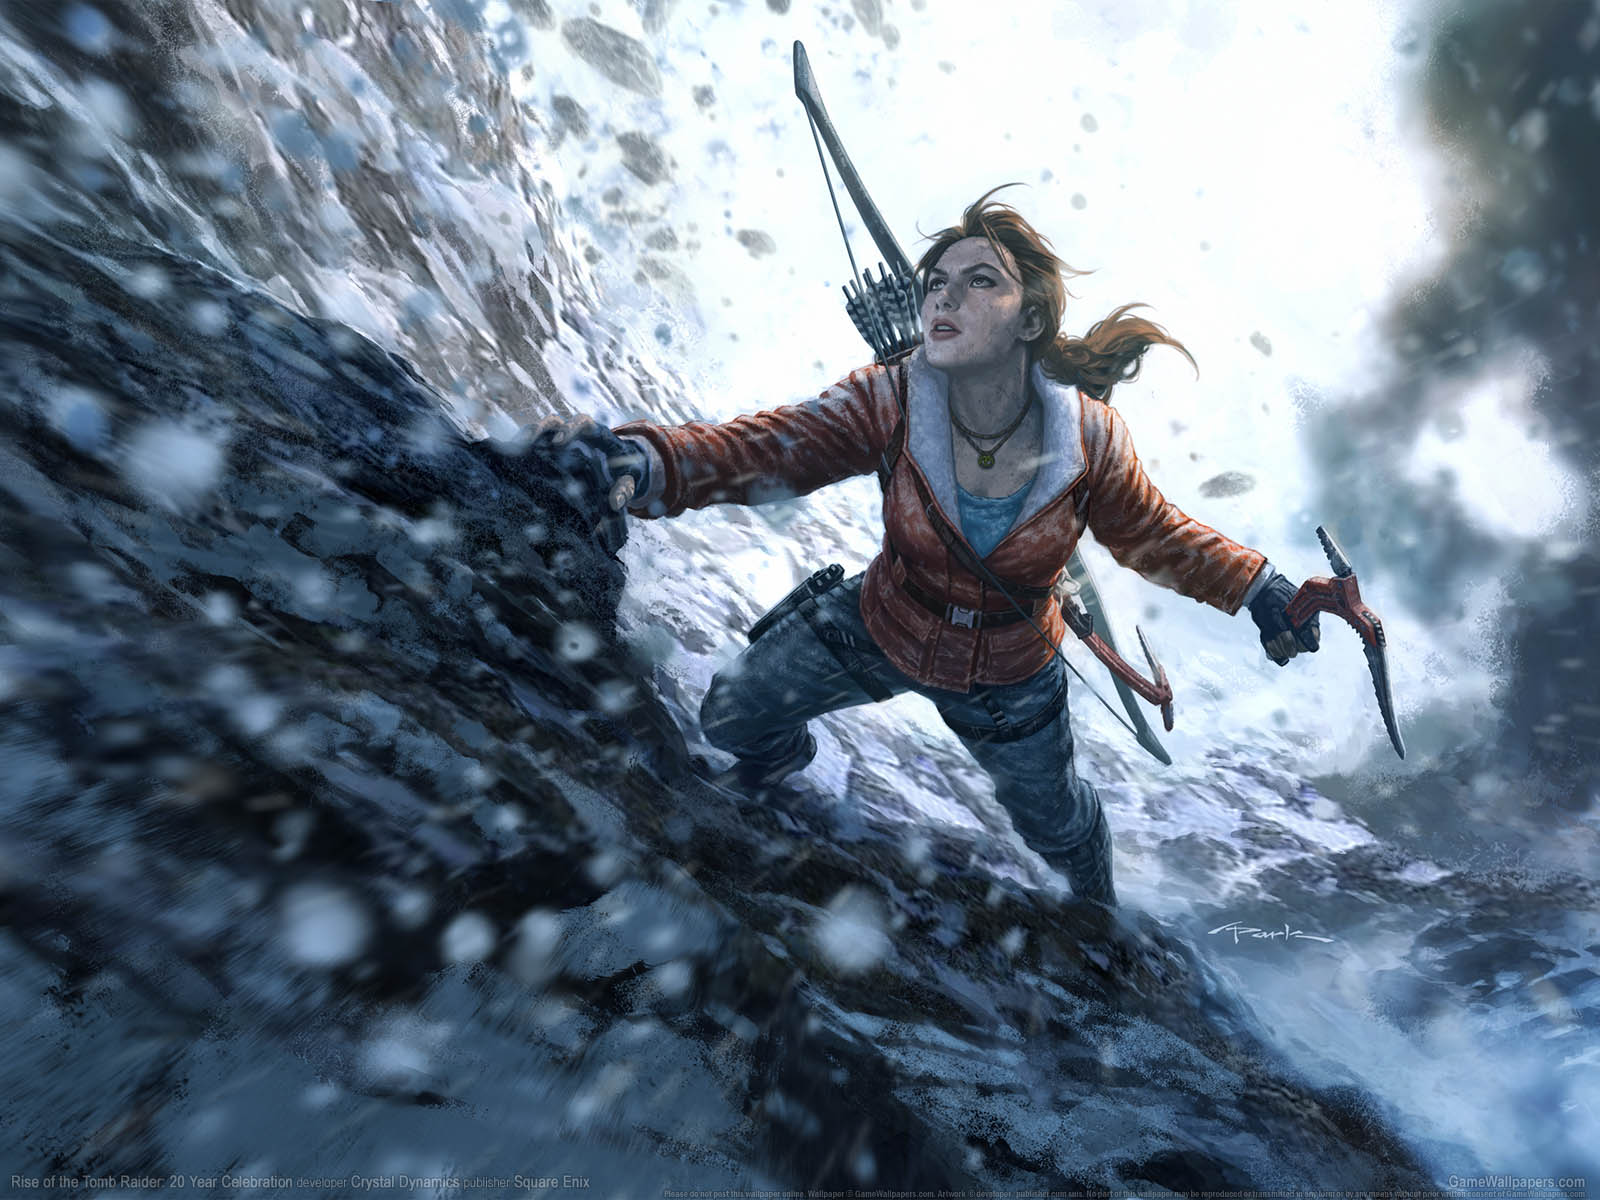 Rise of the Tomb Raider%3A 20 Year Celebration wallpaper 02 1600x1200